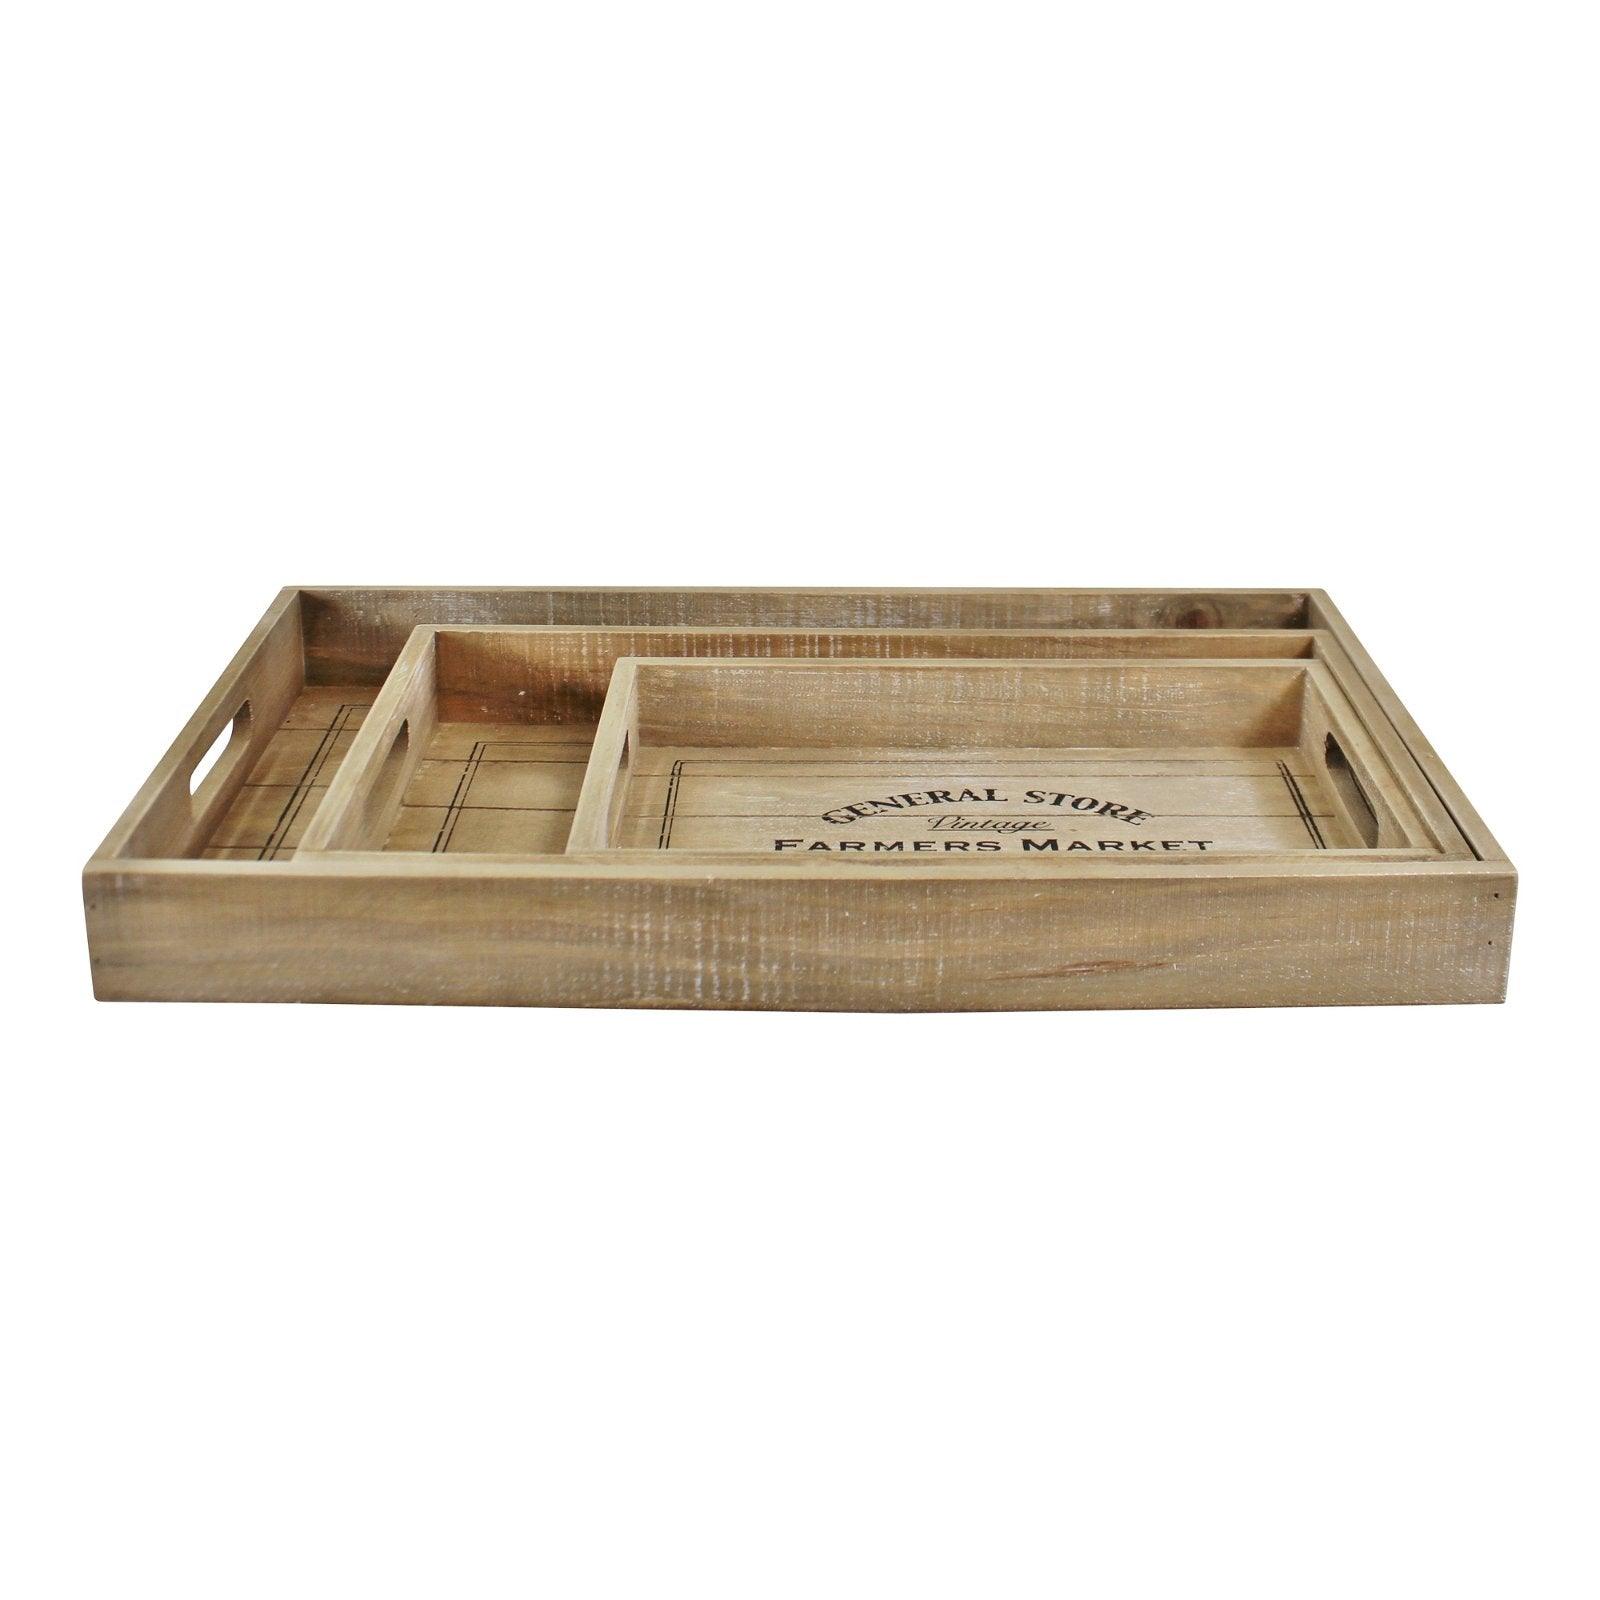 View Set Of 3 General Store Wooden Trays With Handles information